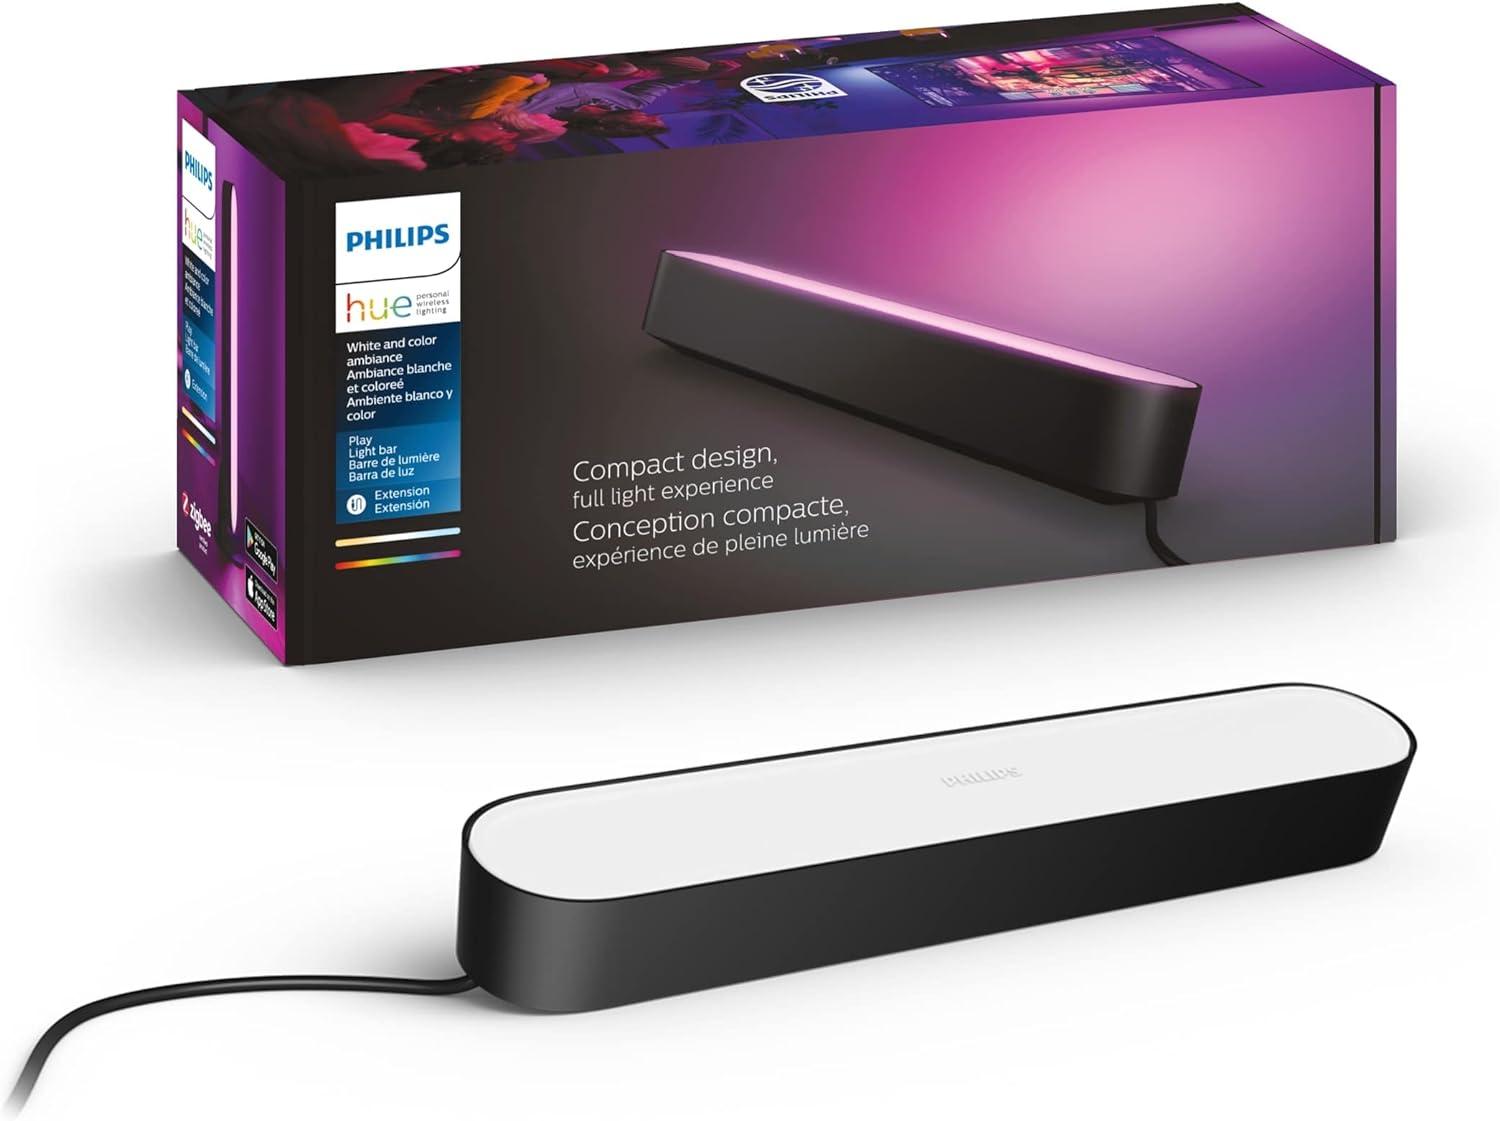 Philips Hue Smart Play Light Bar Extension for $48 Shipped